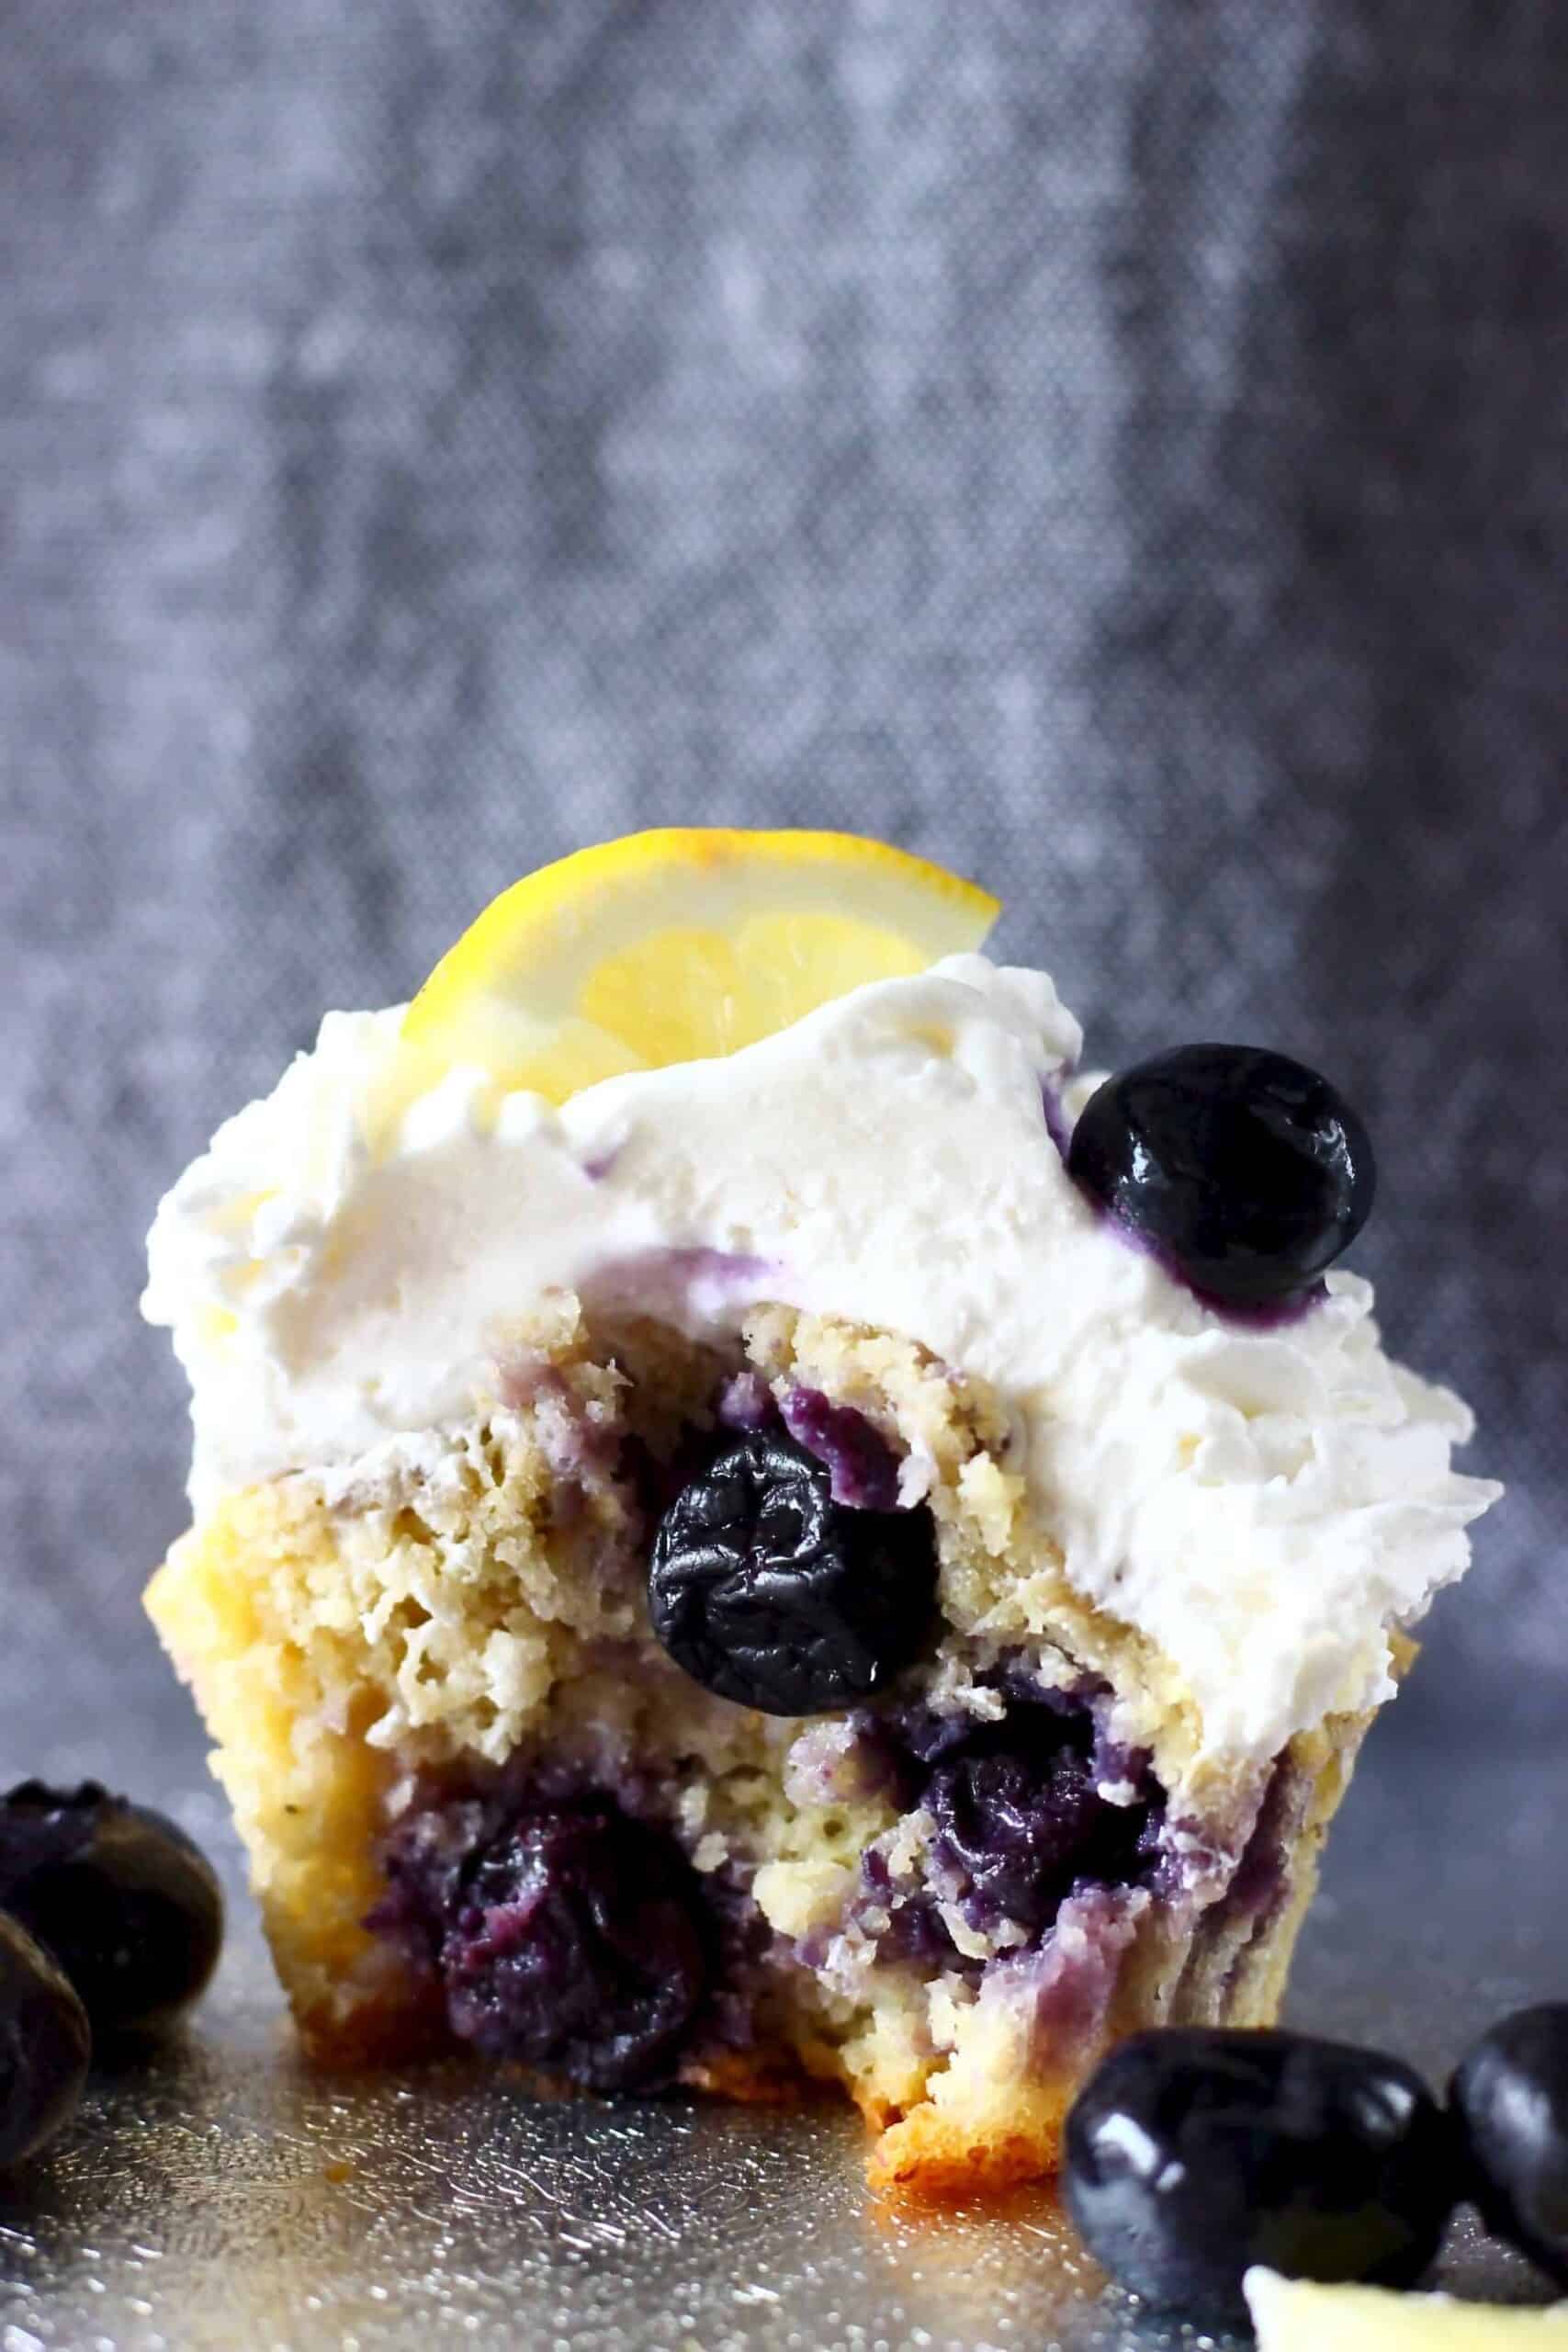 A blueberry cupcake with a bite taken out of it topped with creamy frosting and a lemon wedge against a grey background